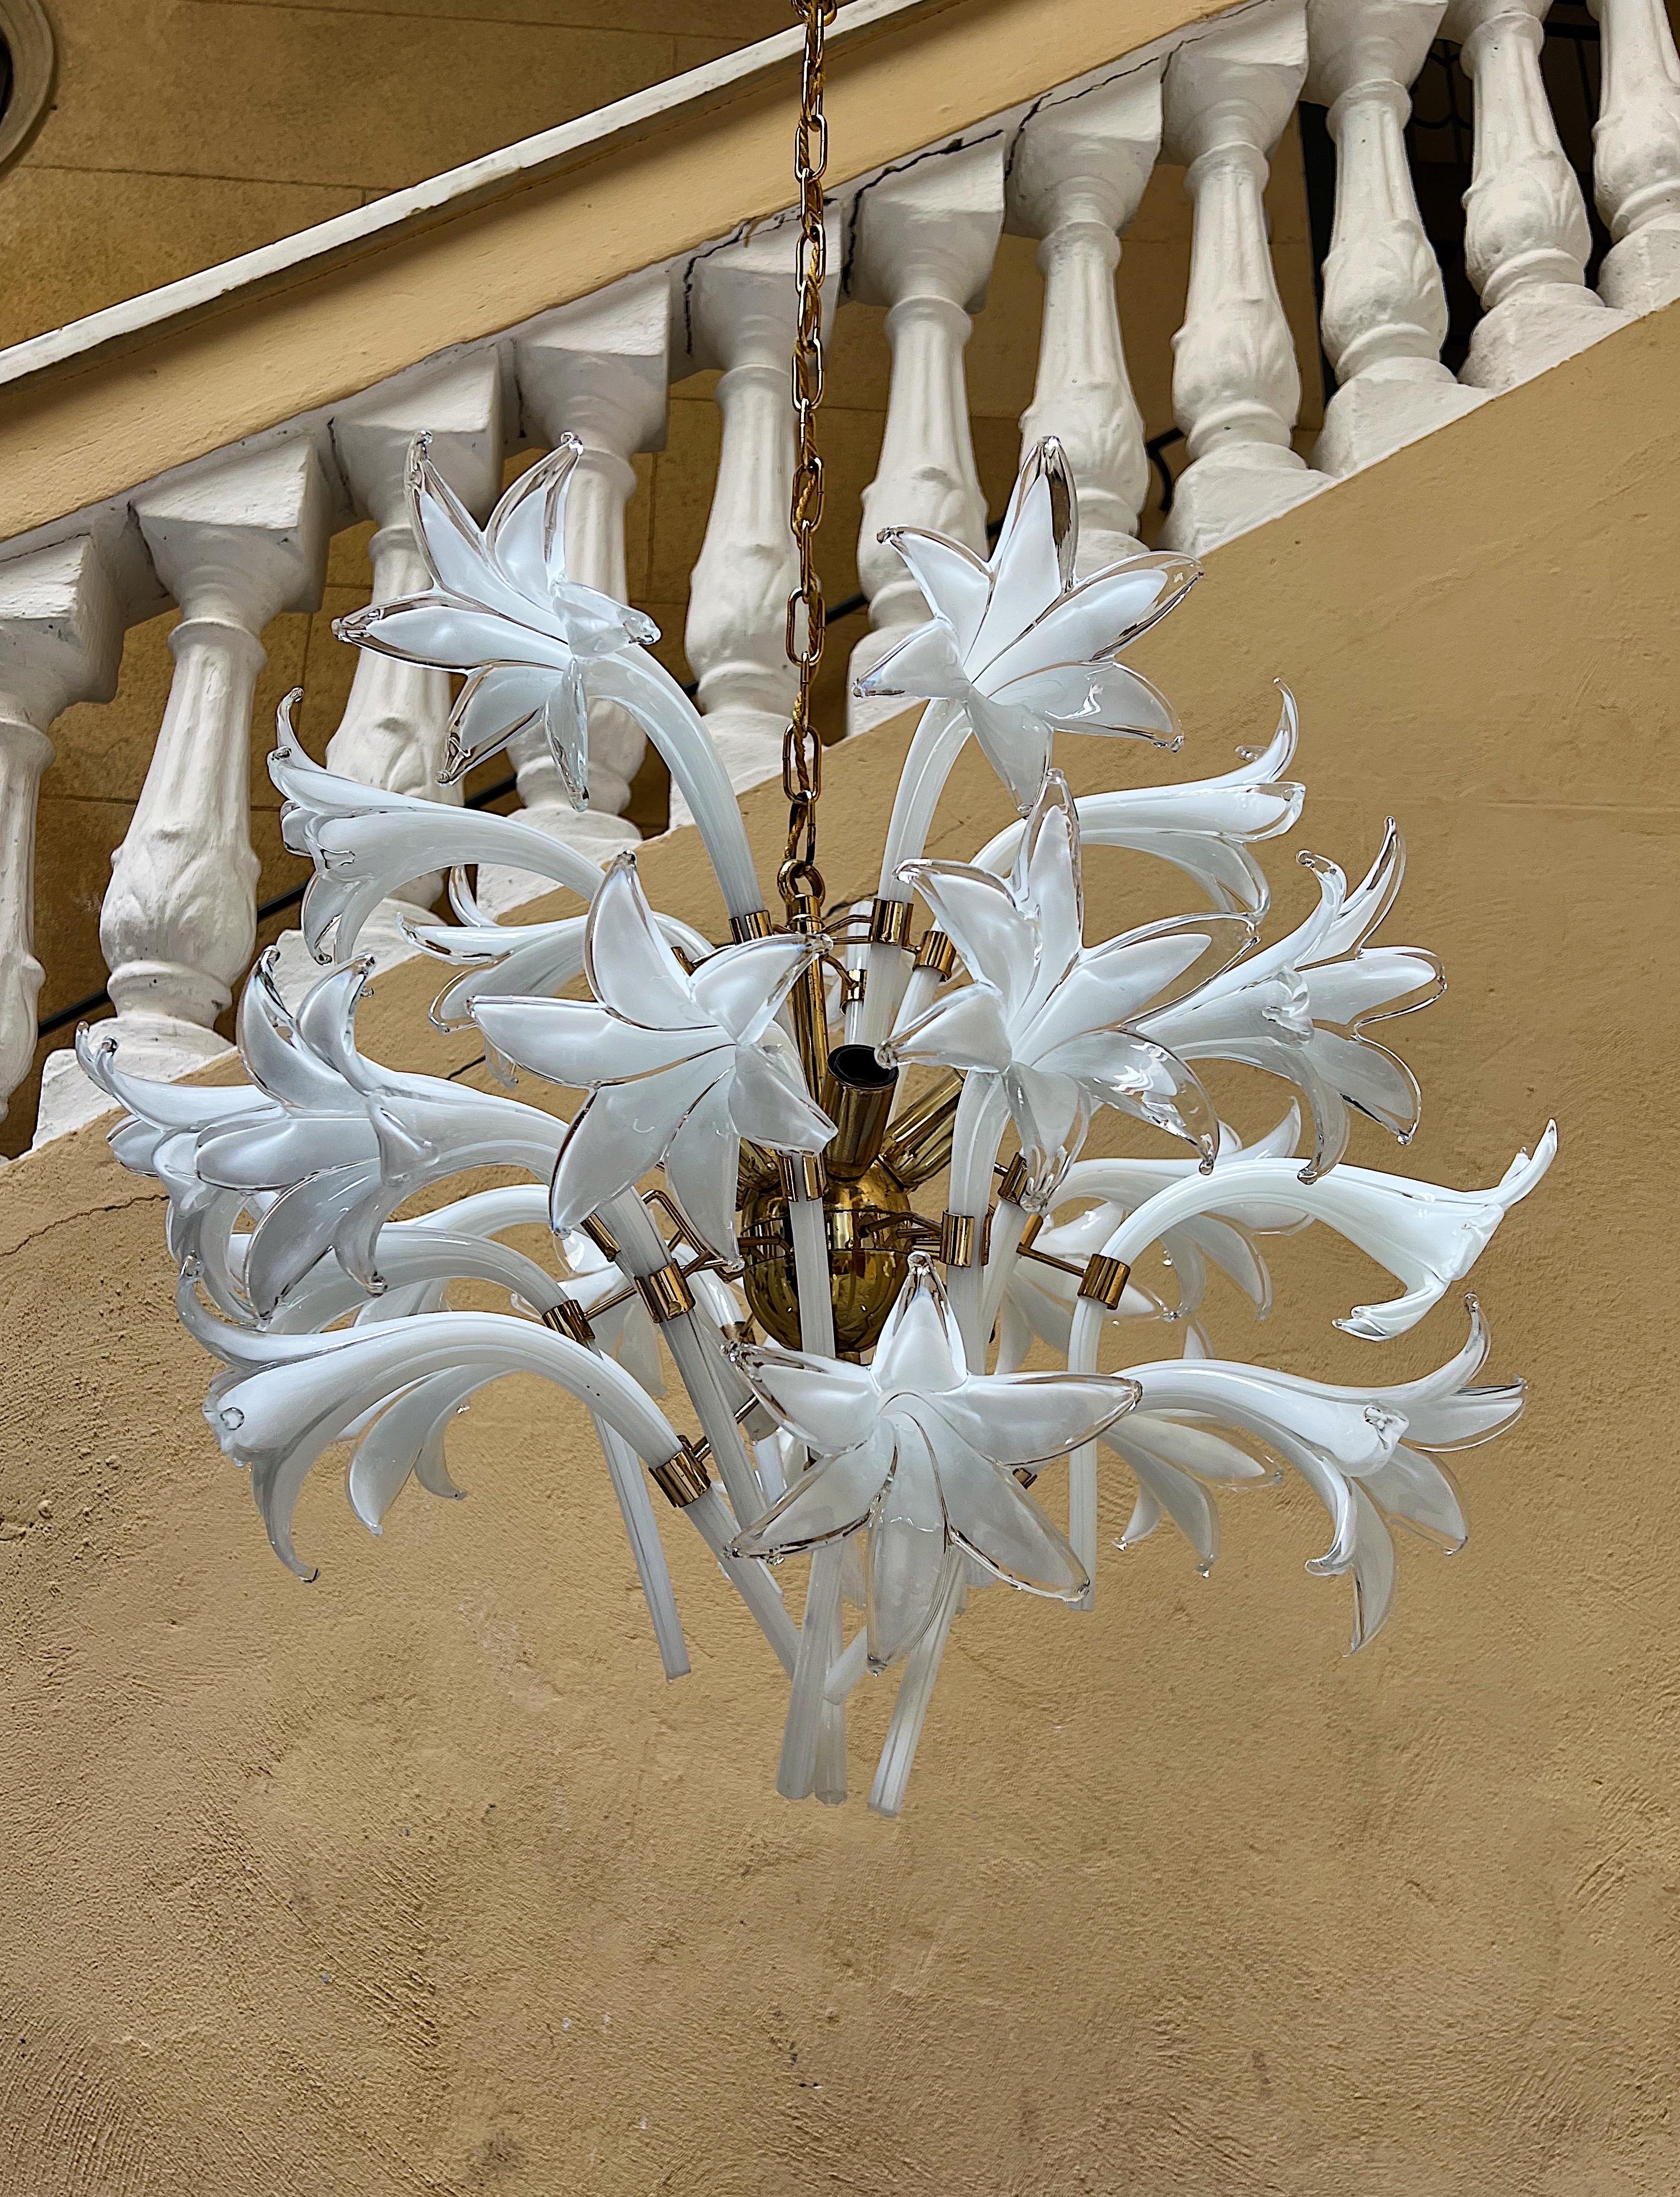 Rare Murano glass chandelier designed by Franco Luce in the 1970s.
The light consists of of a golden metal base with white flowers.

The high level of craftsmanship makes this piece preciously stunning.

Details
Creator: Franco